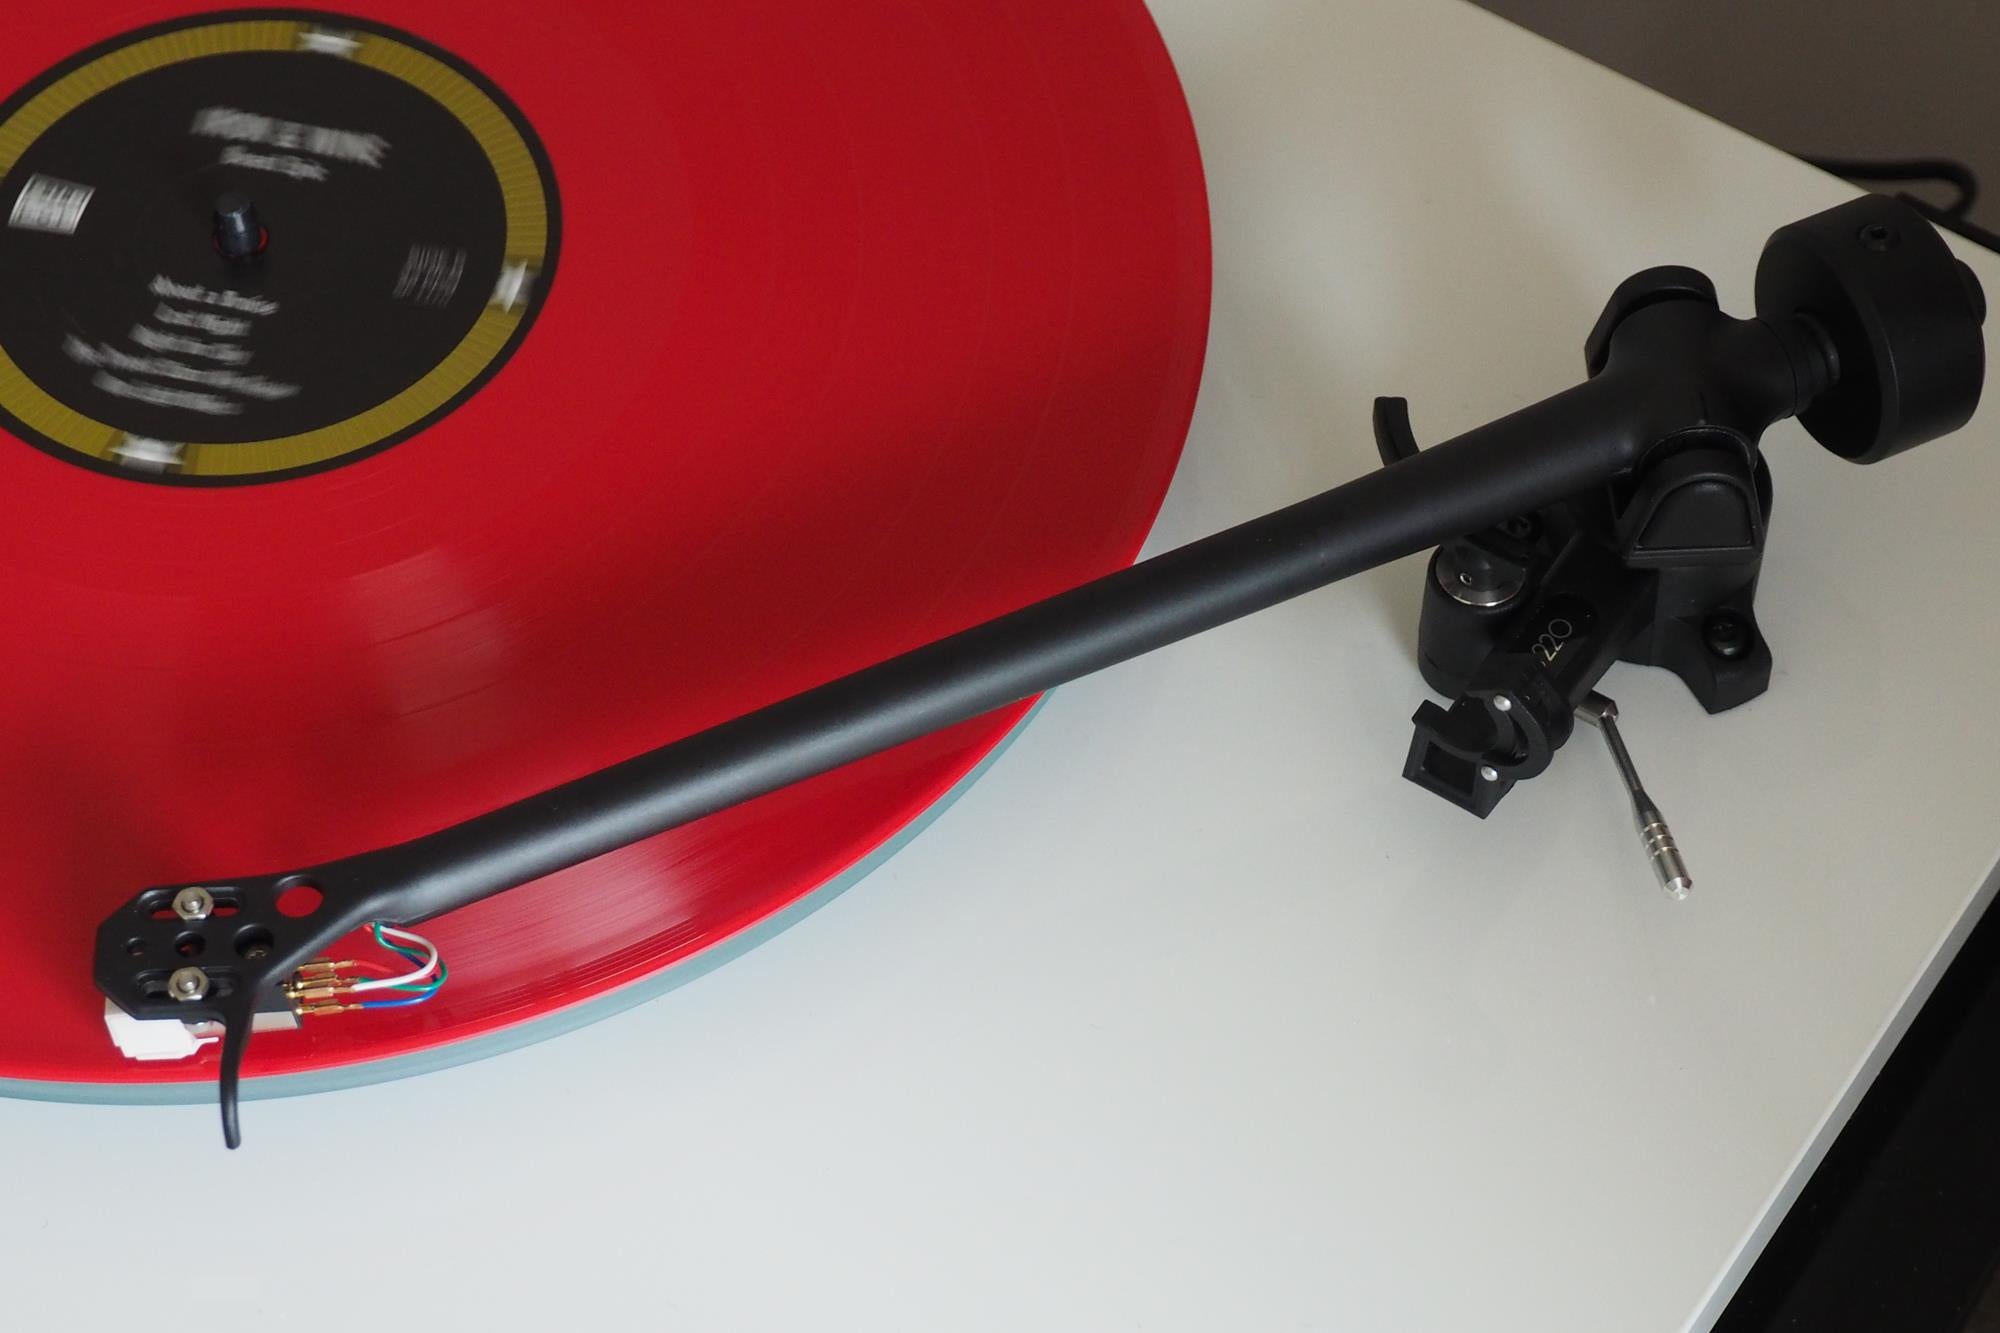 Close-up of Rega Planar 2 turntable with red vinyl record spinning.